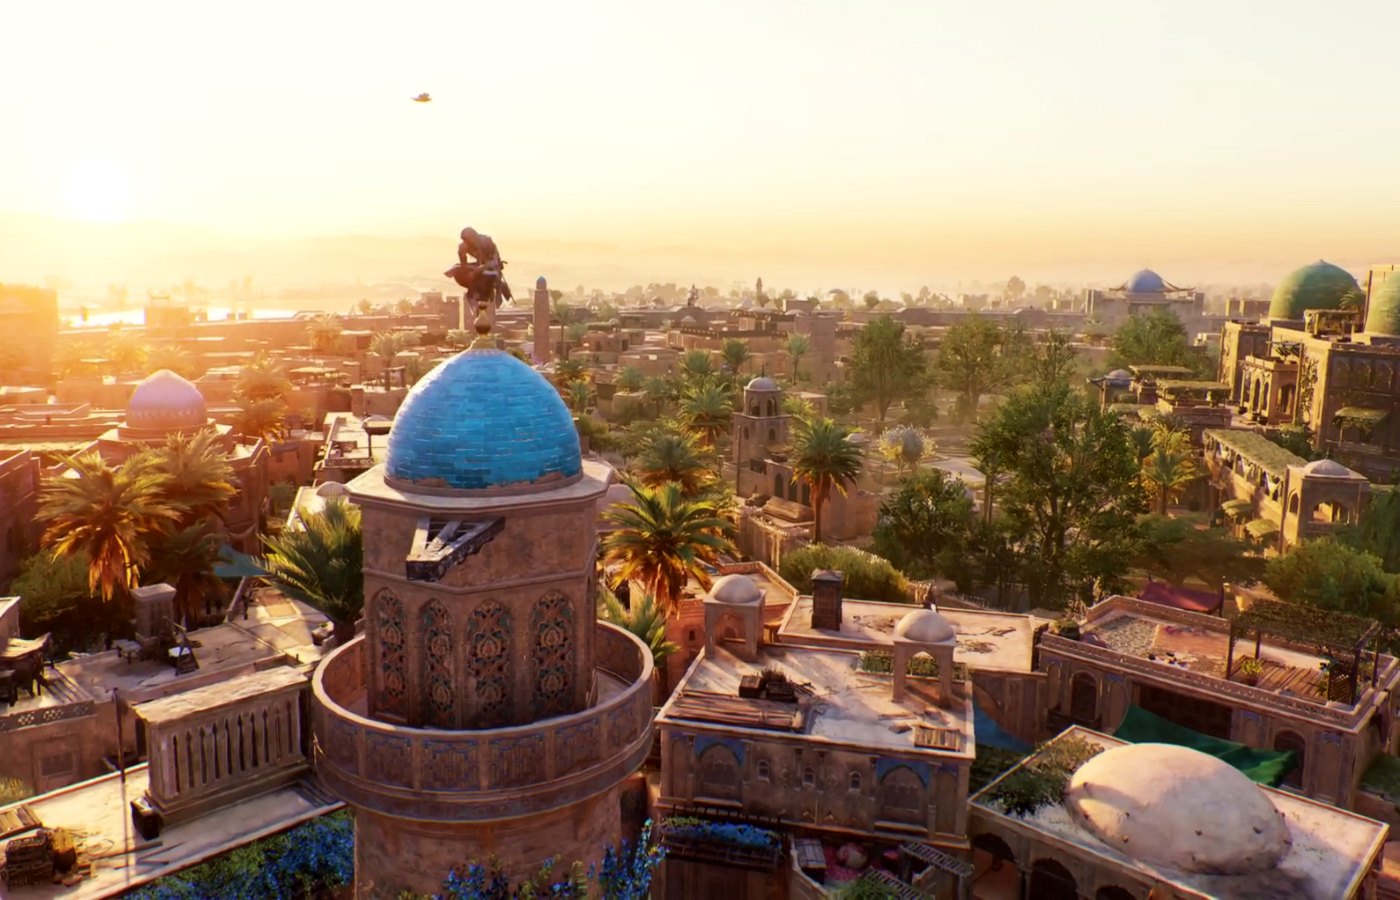 An image from the new Assassin’s Creed.